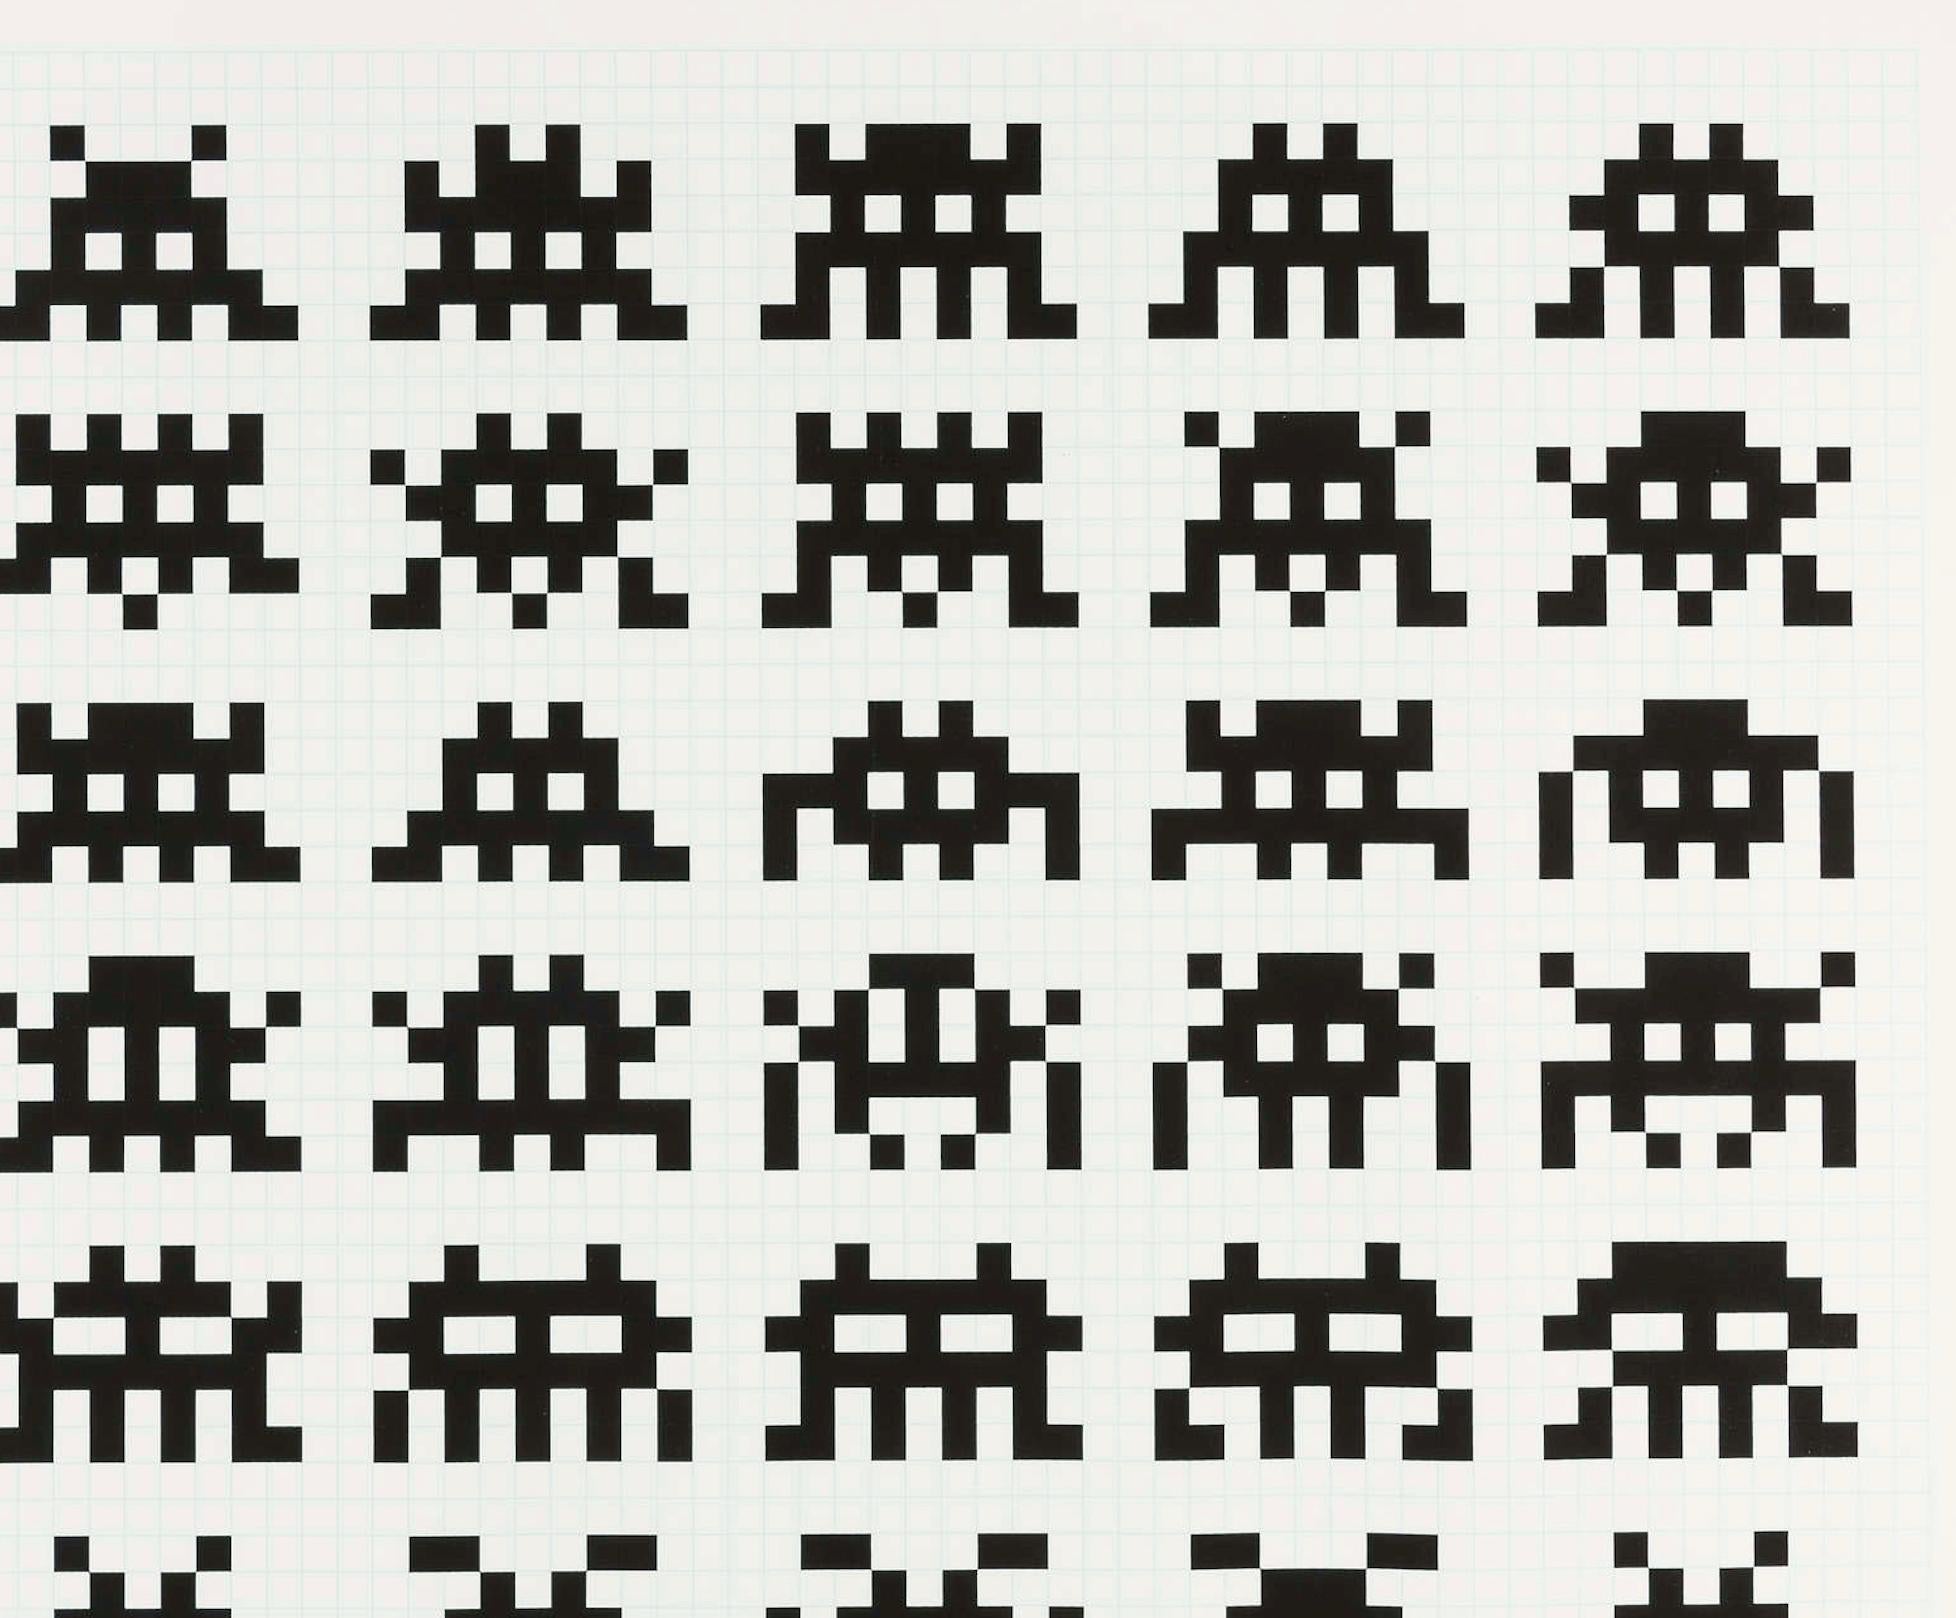 Repetition Variation Evolution - Contemporary Art, Urban, Street Art, Space - Gray Abstract Print by Invader